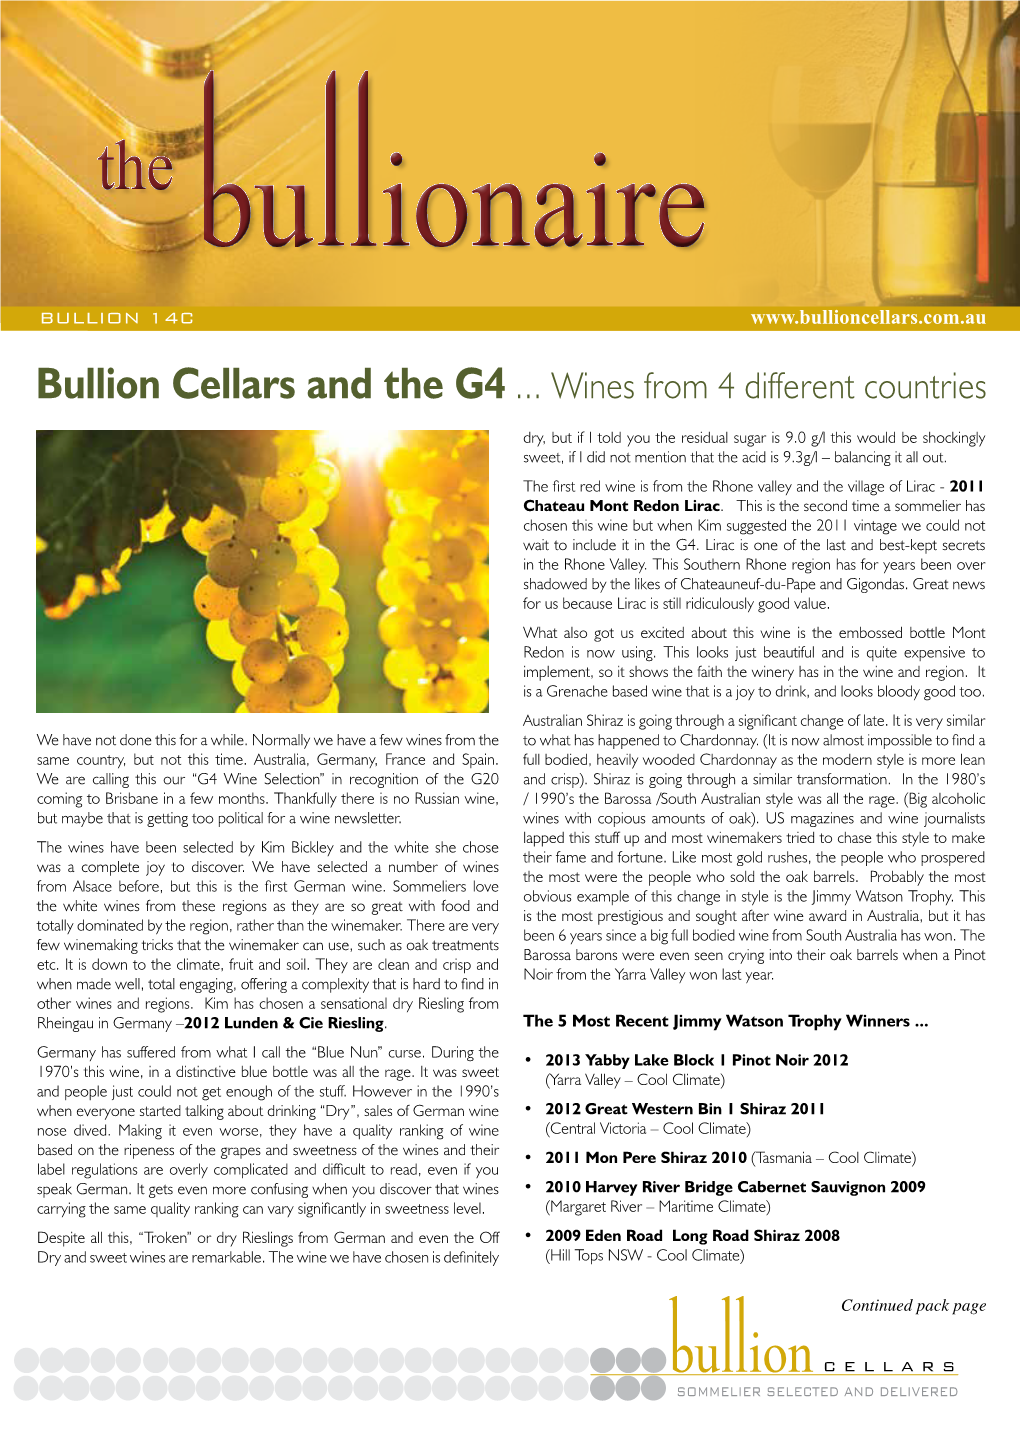 Bullion Cellars and the G4 ... Wines from 4 Different Countries